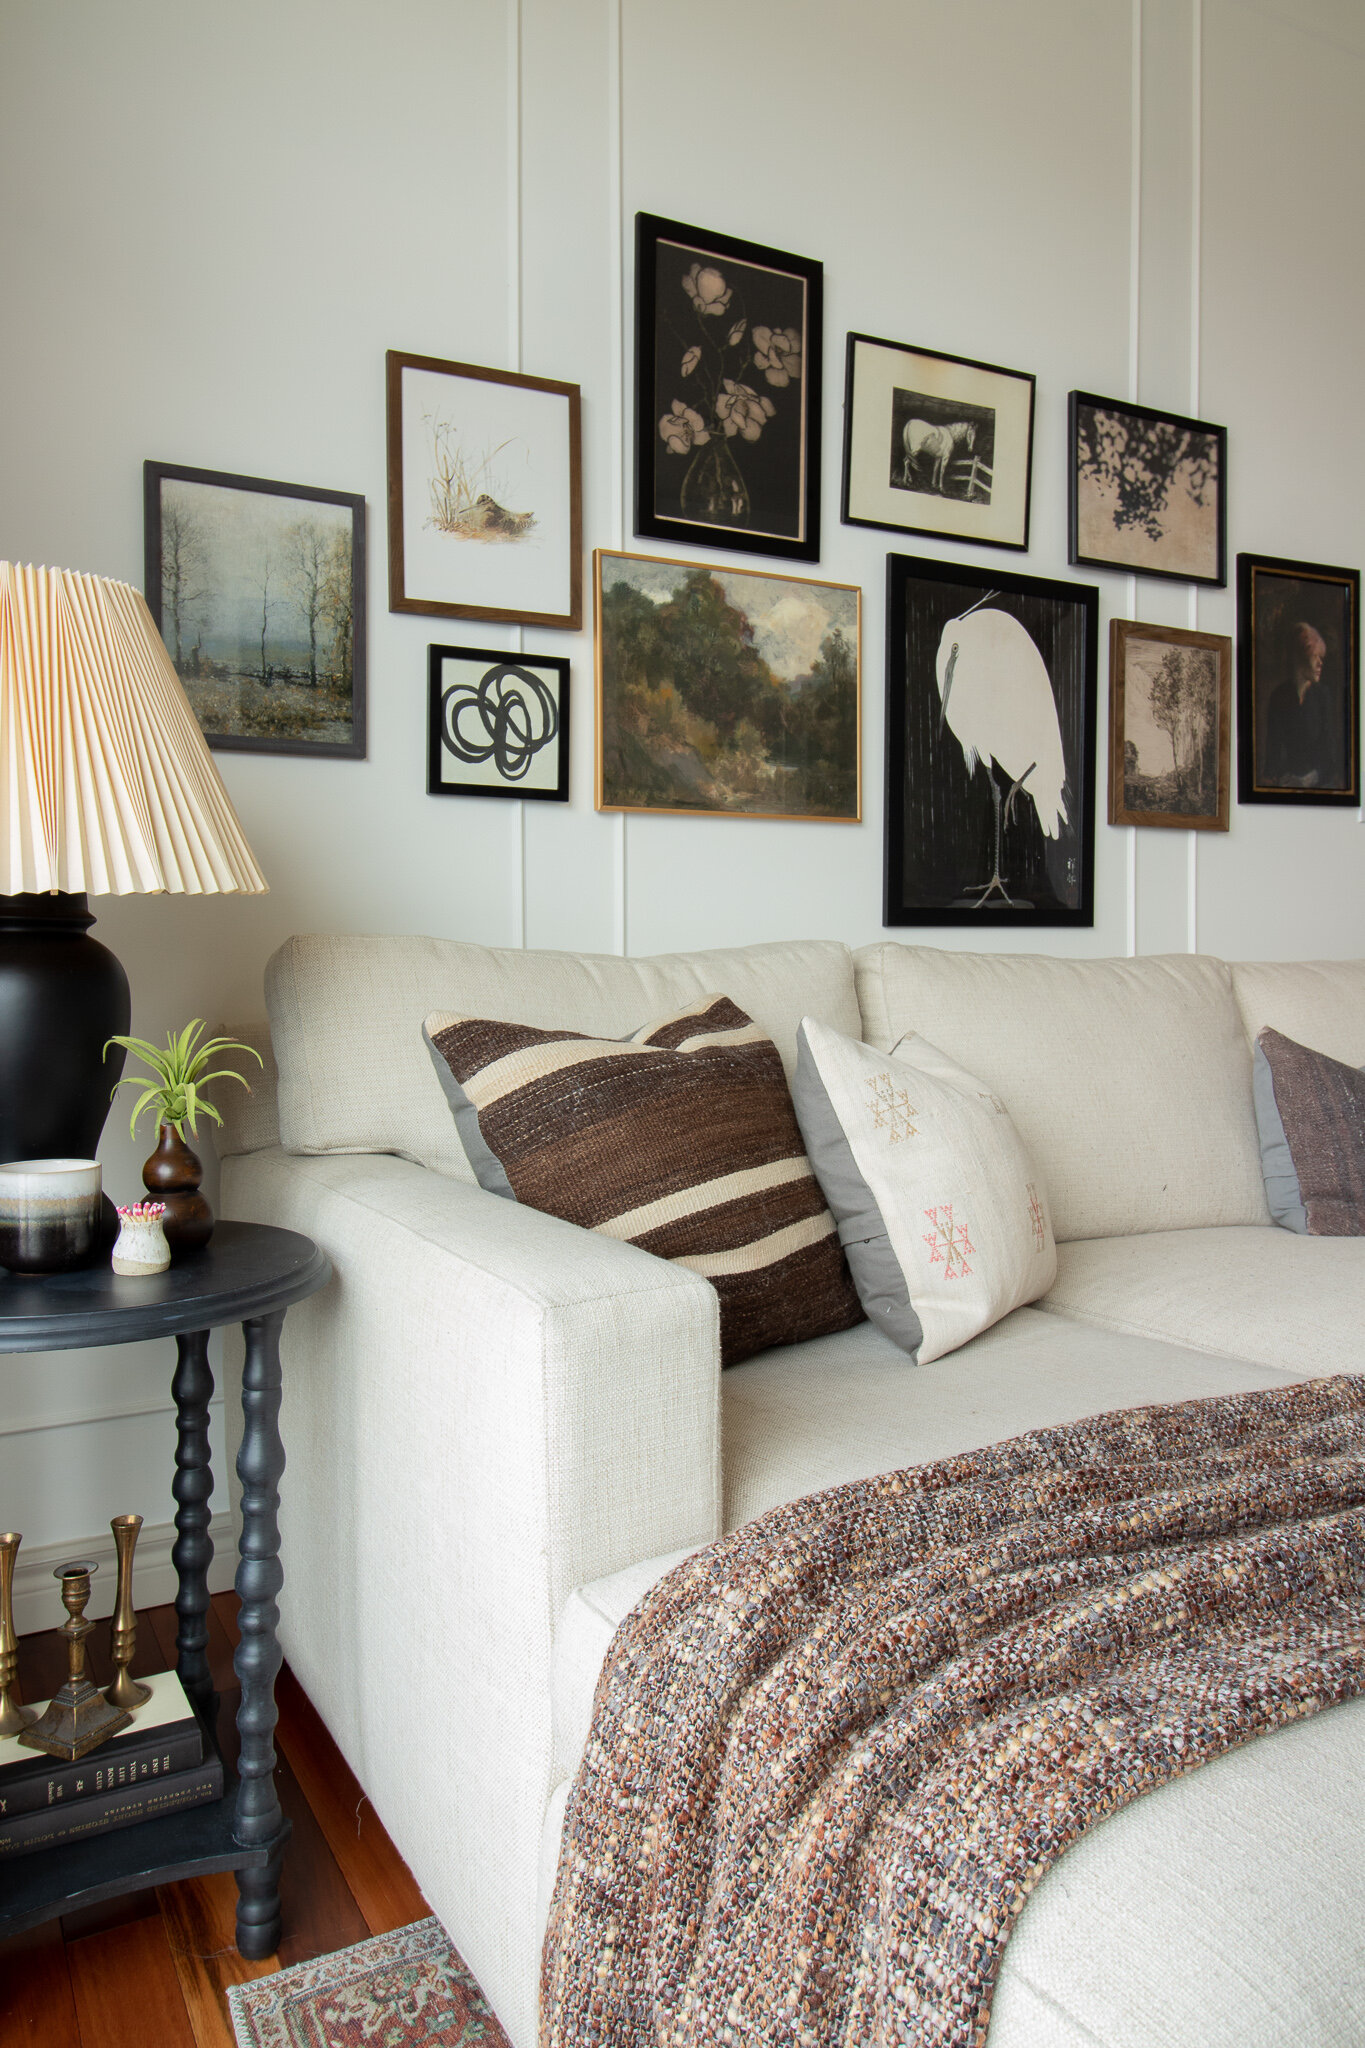 gallery wall of vintage art, sectional couch with pillows, side table with lamp and accessories